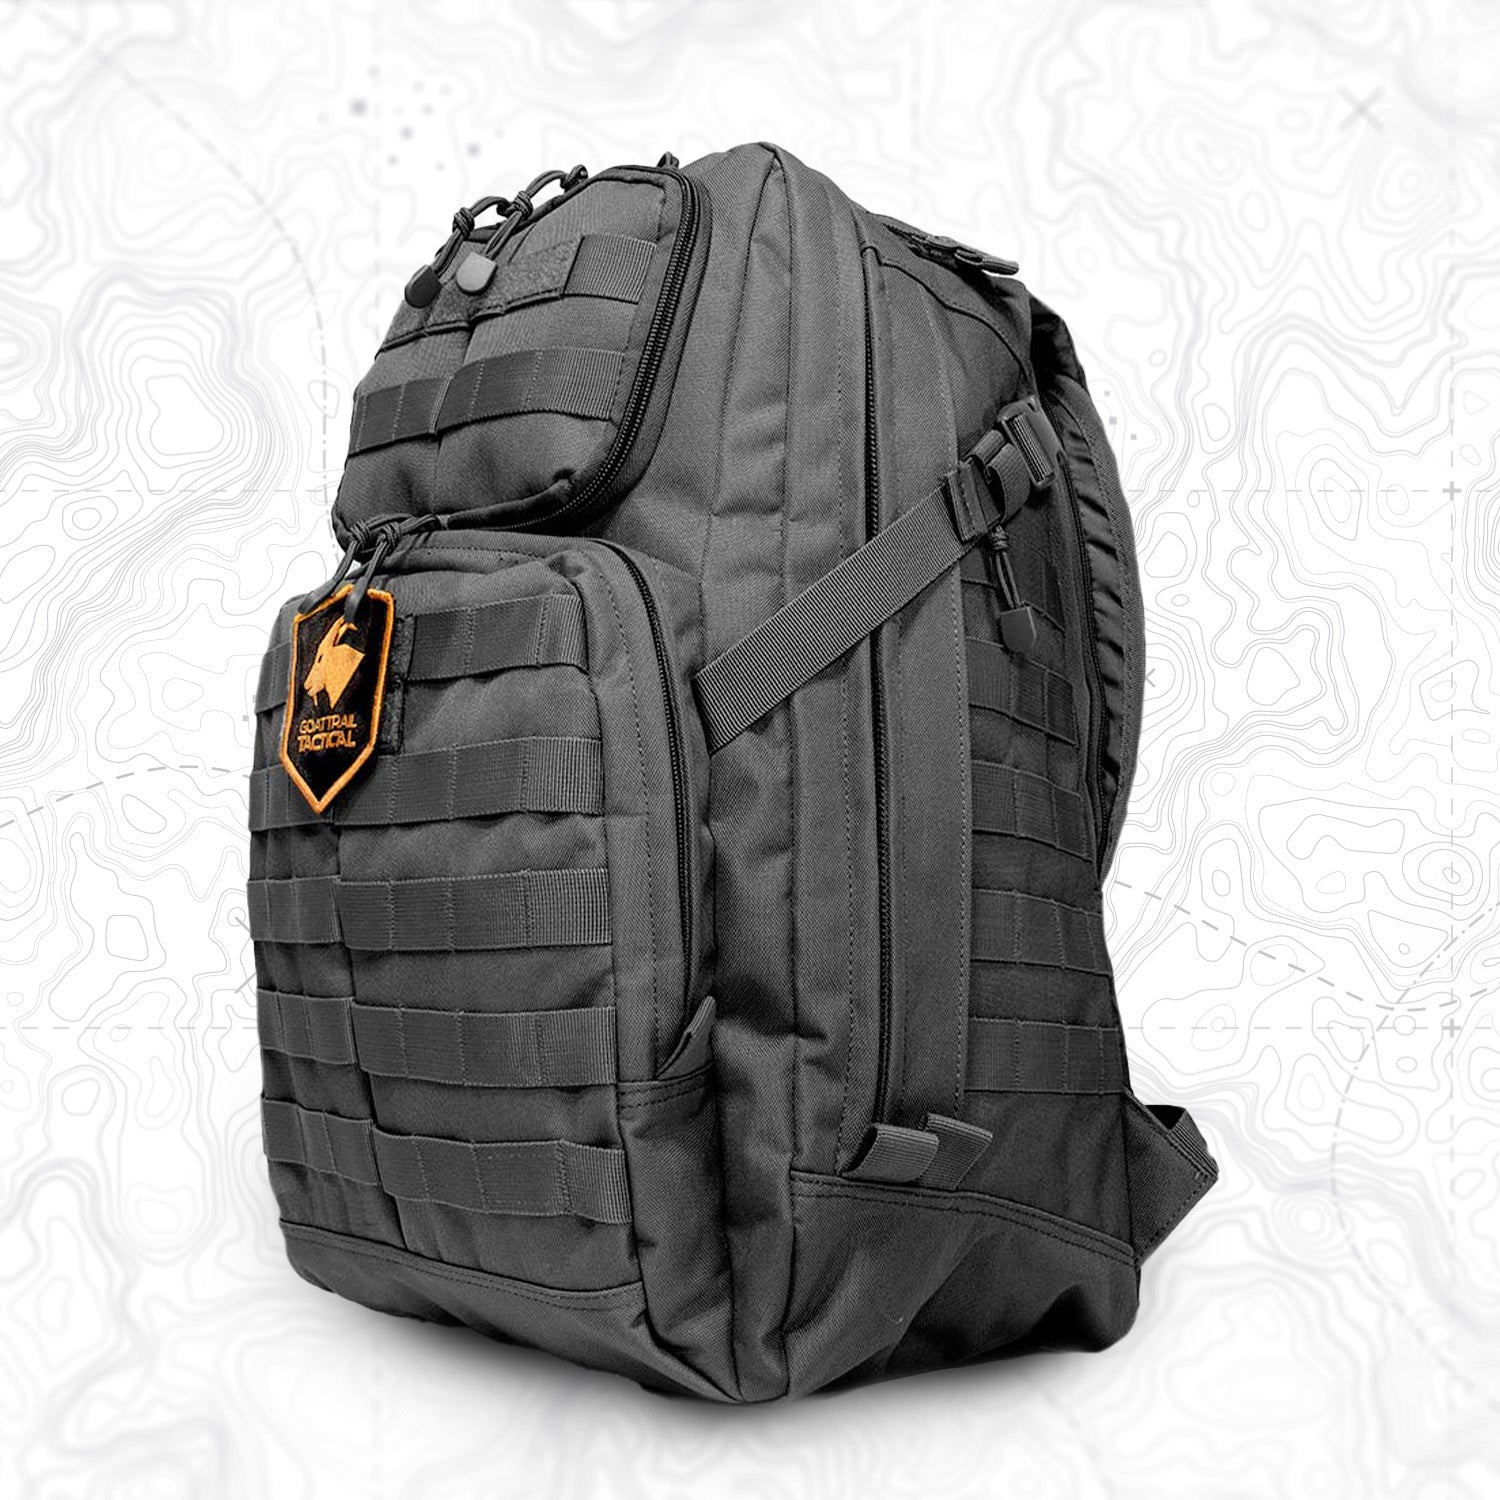 Military Backpacks – Your Everyday Backpack